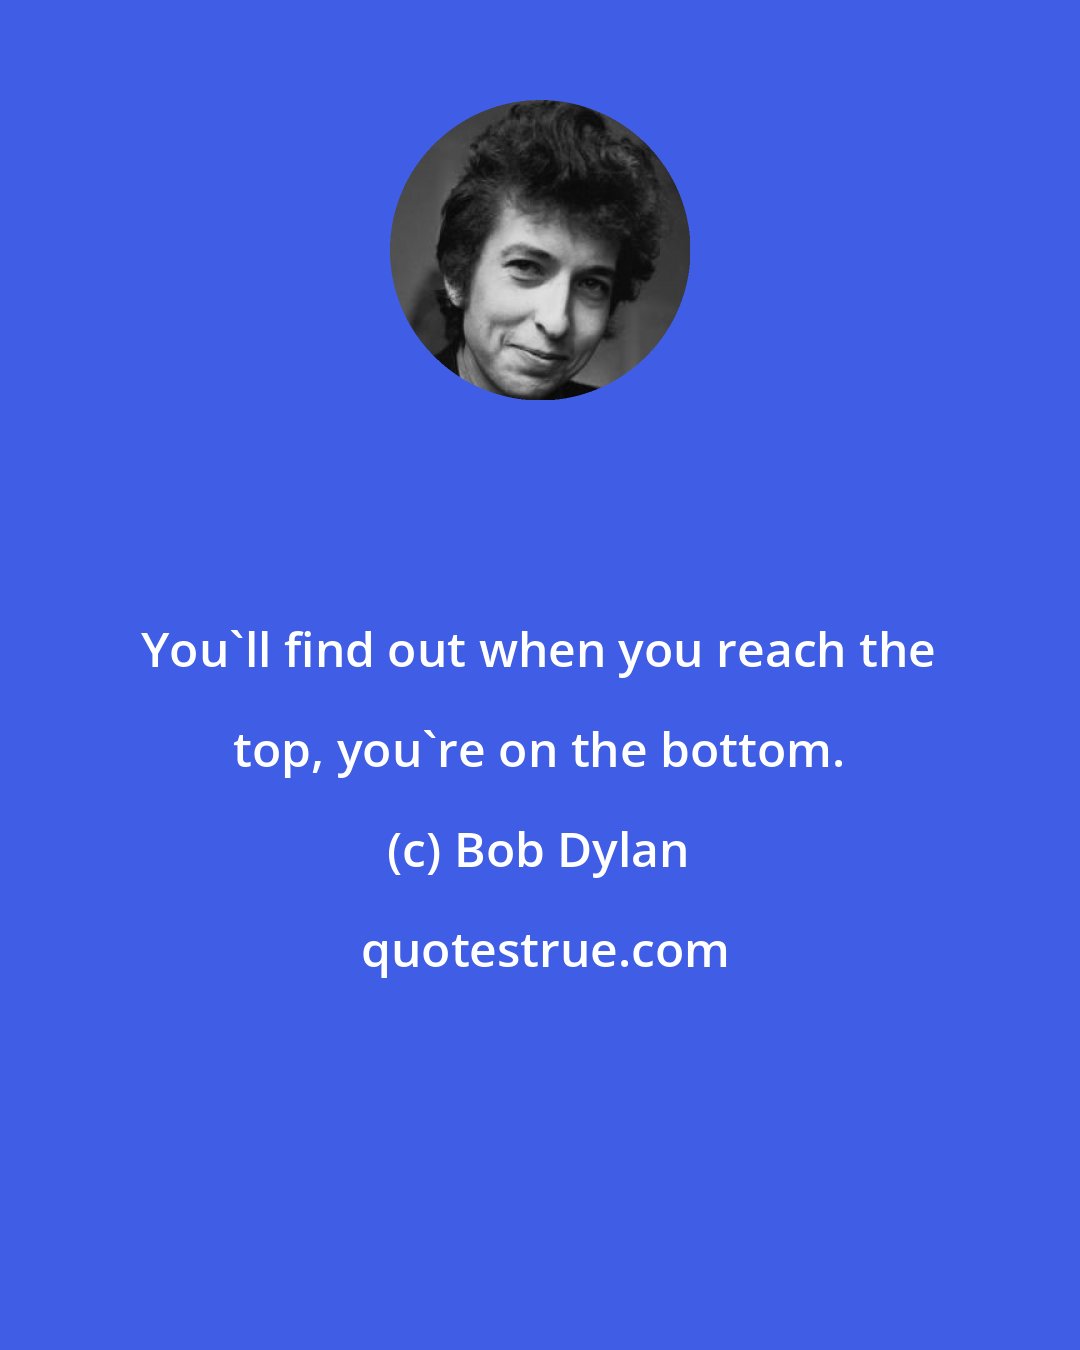 Bob Dylan: You'll find out when you reach the top, you're on the bottom.